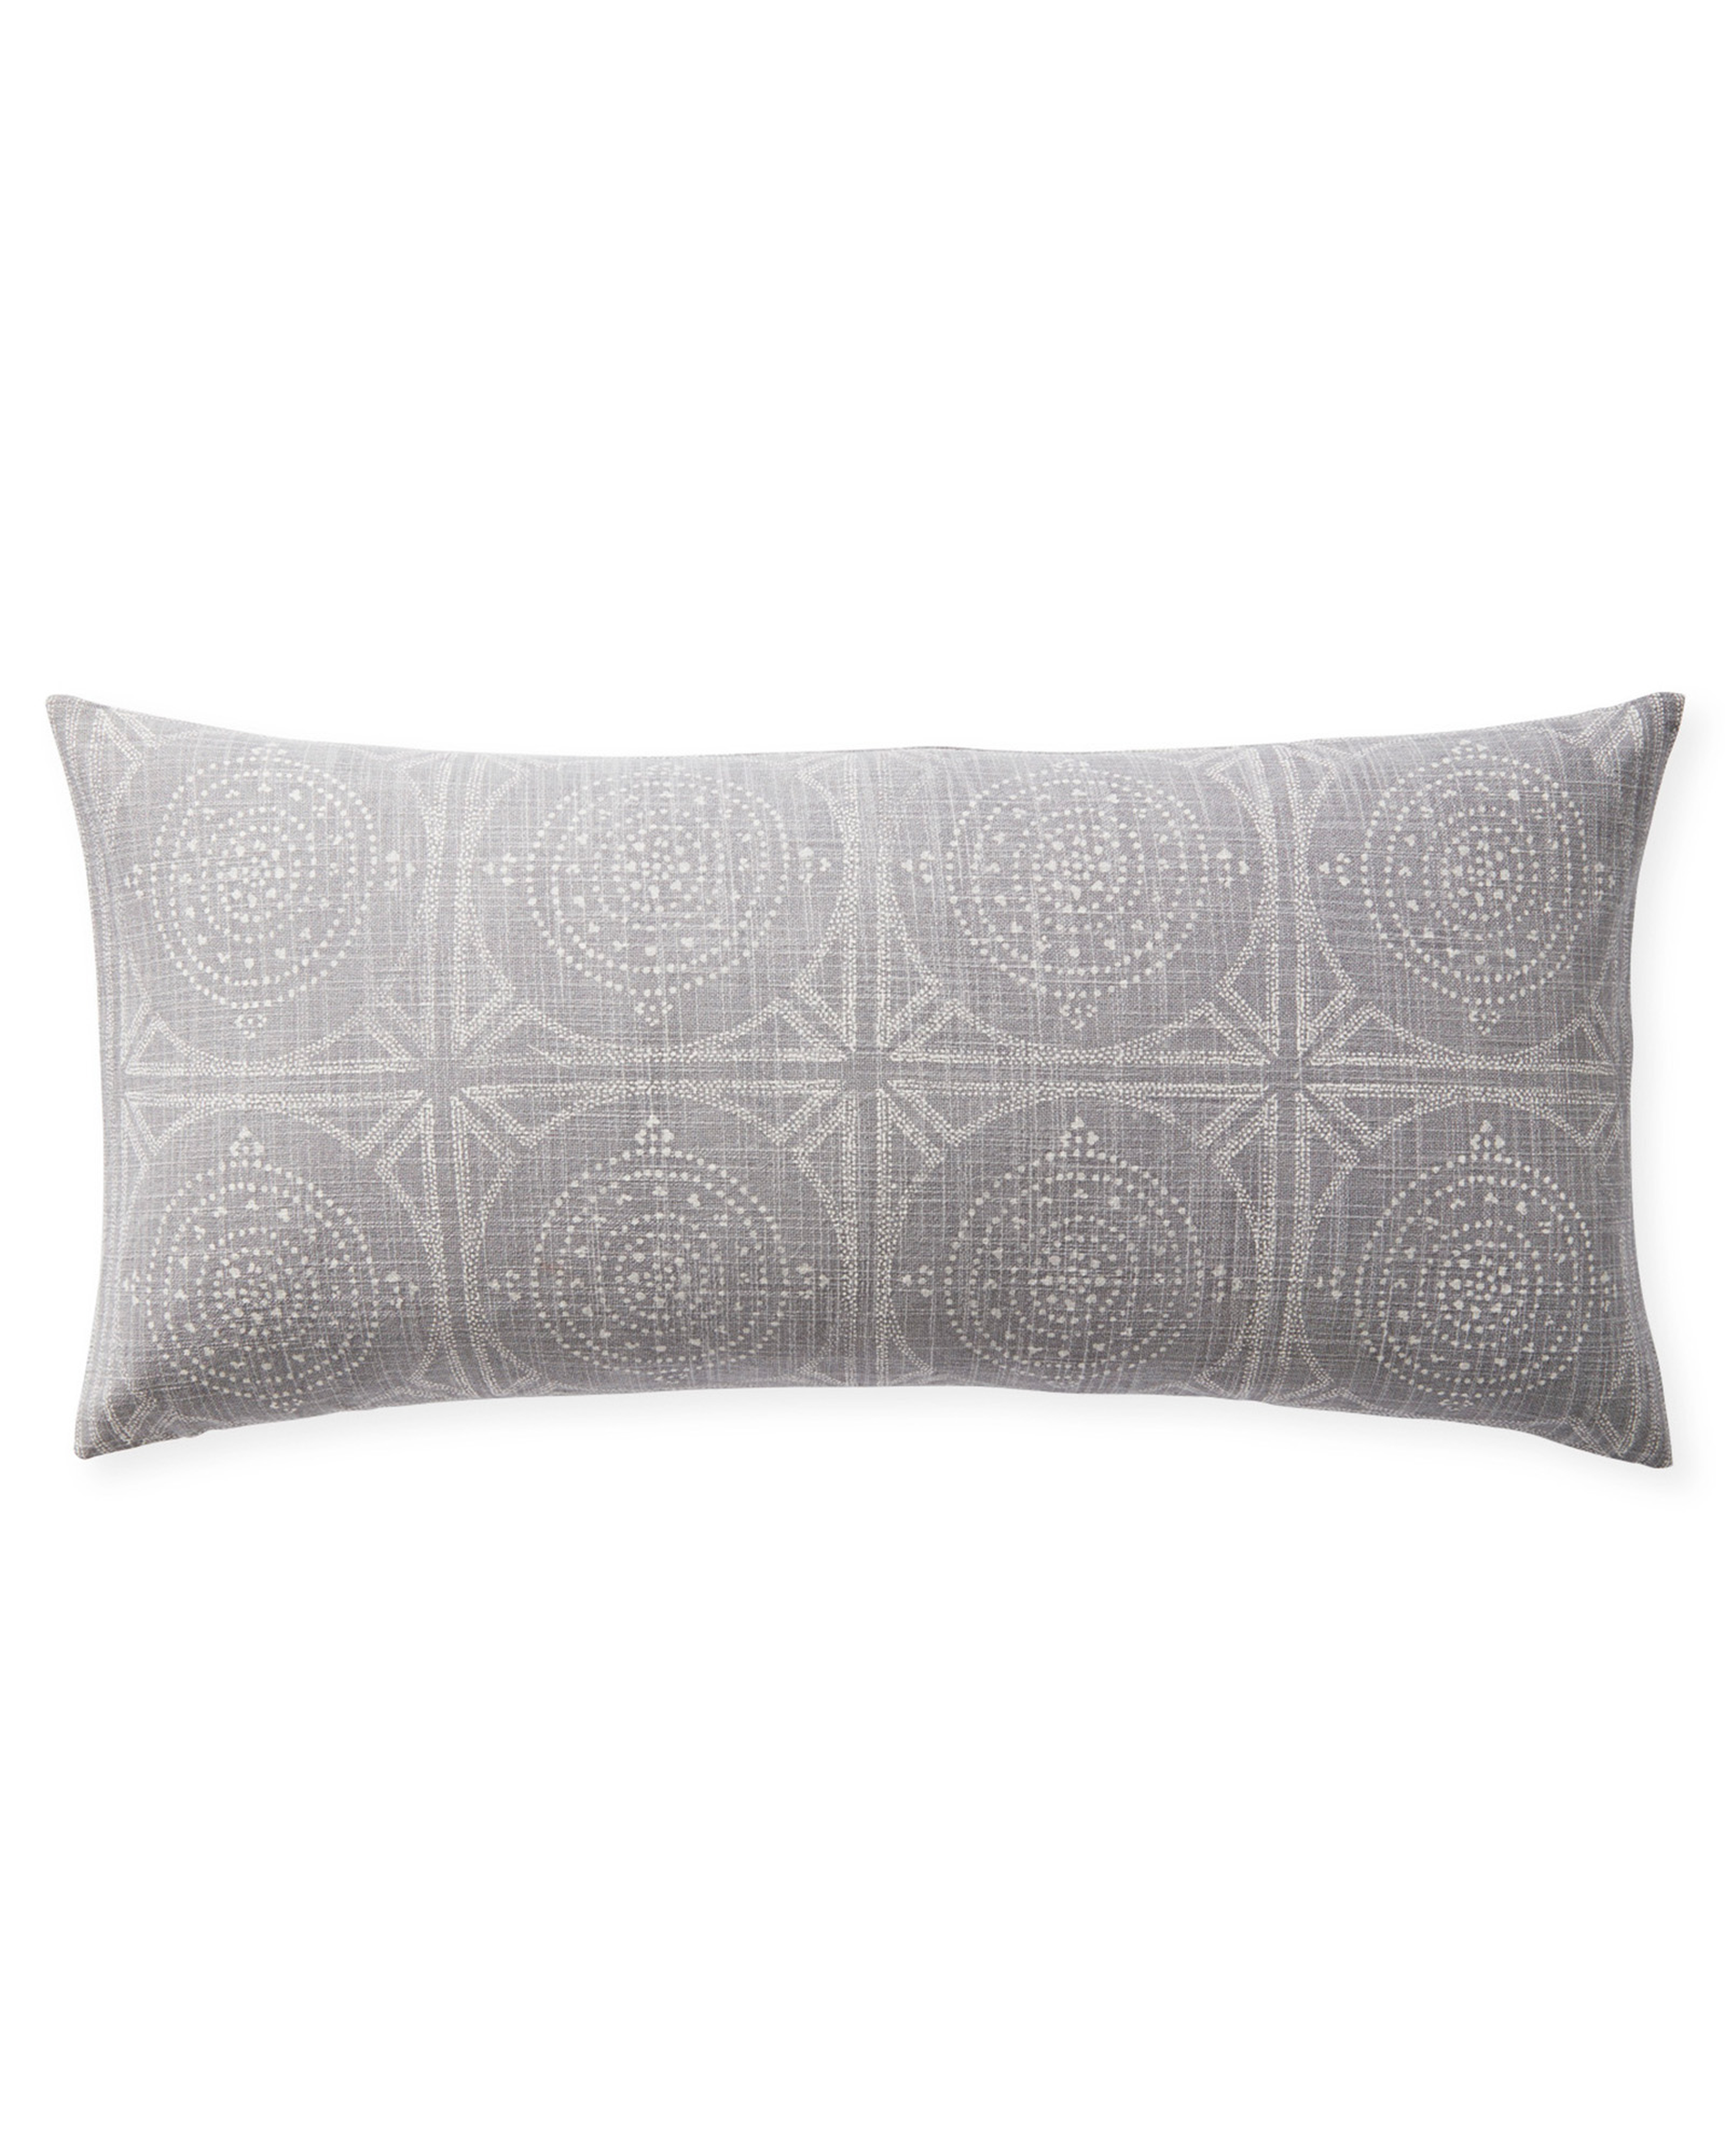 Camille Mosaic Lumbar 14 x 30" Pillow Cover - Smoke - Insert sold separately - Serena and Lily